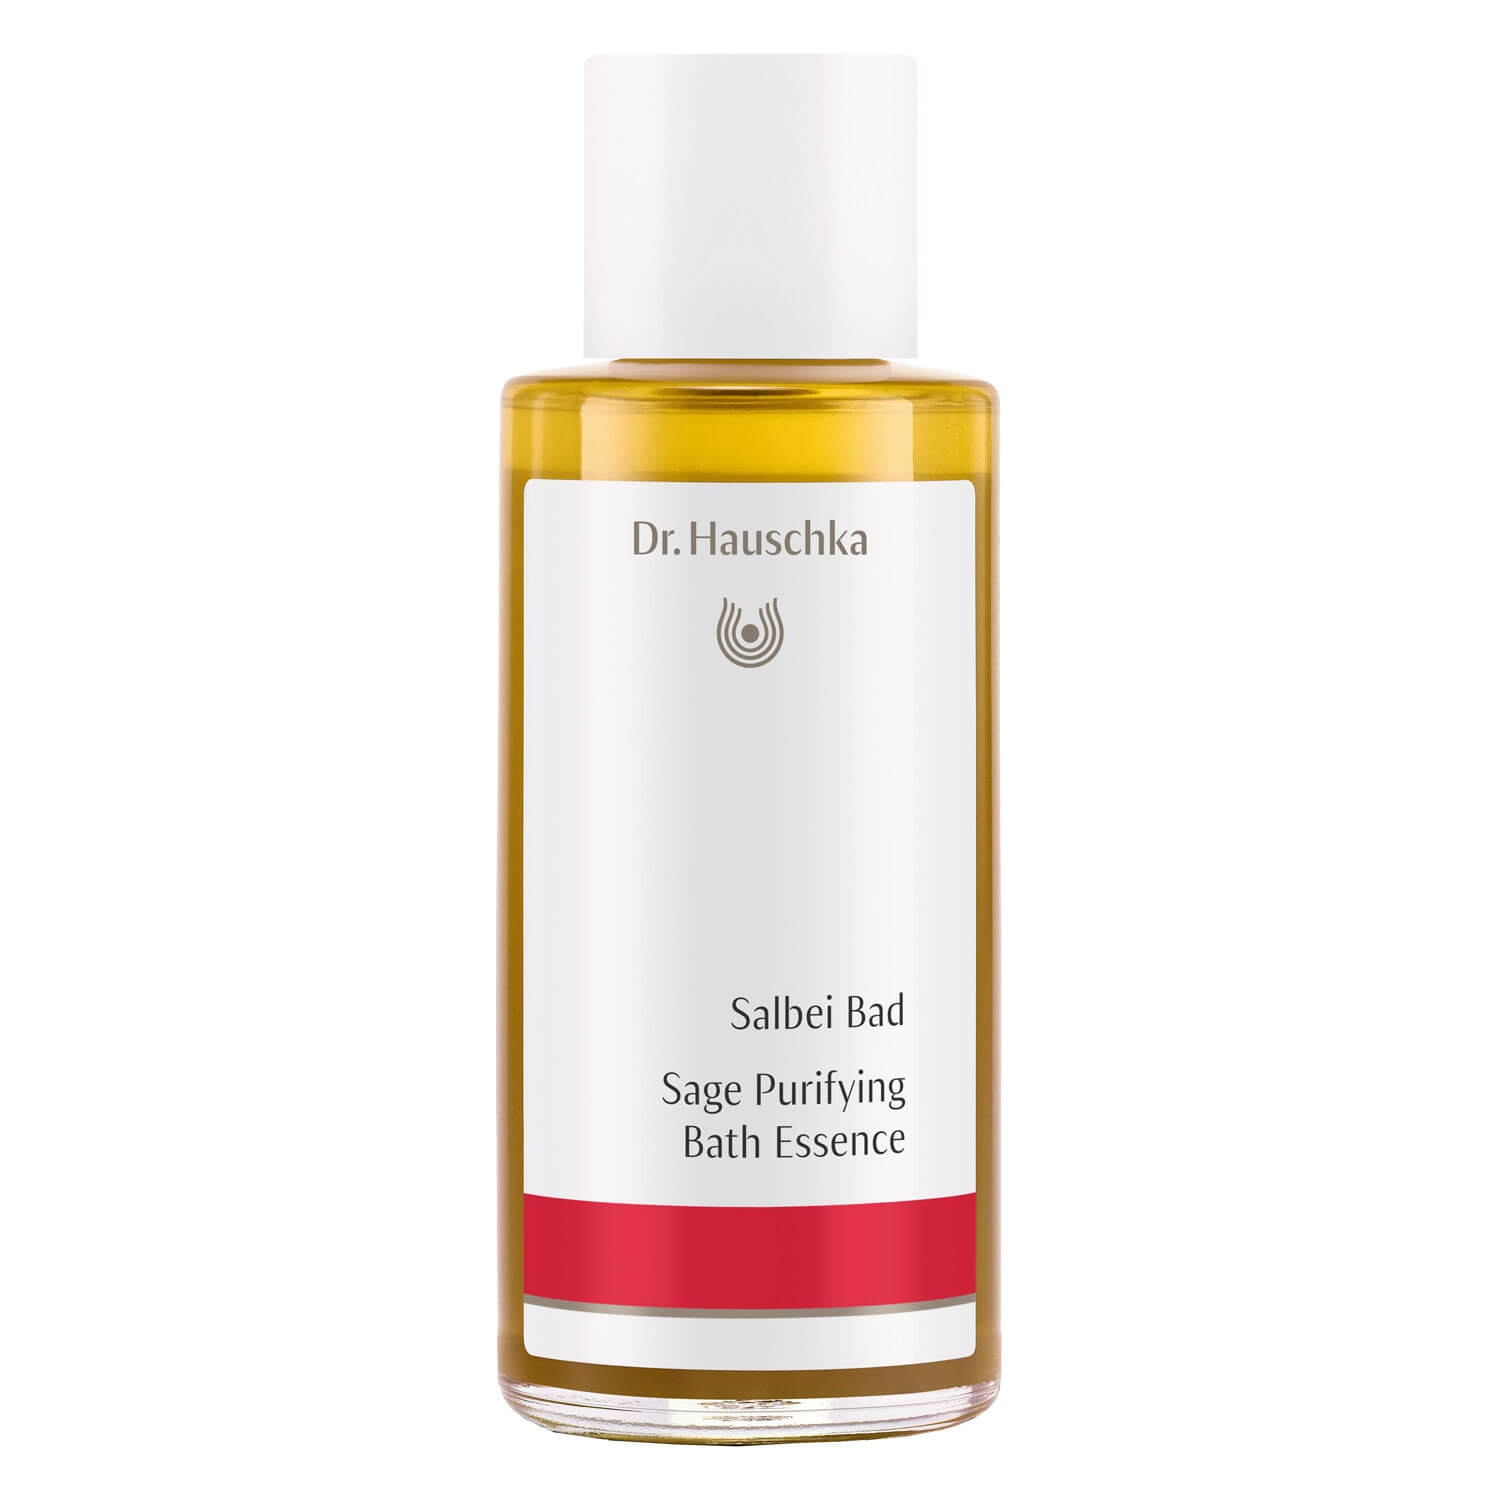 Product image from Dr. Hauschka - Salbei Bad